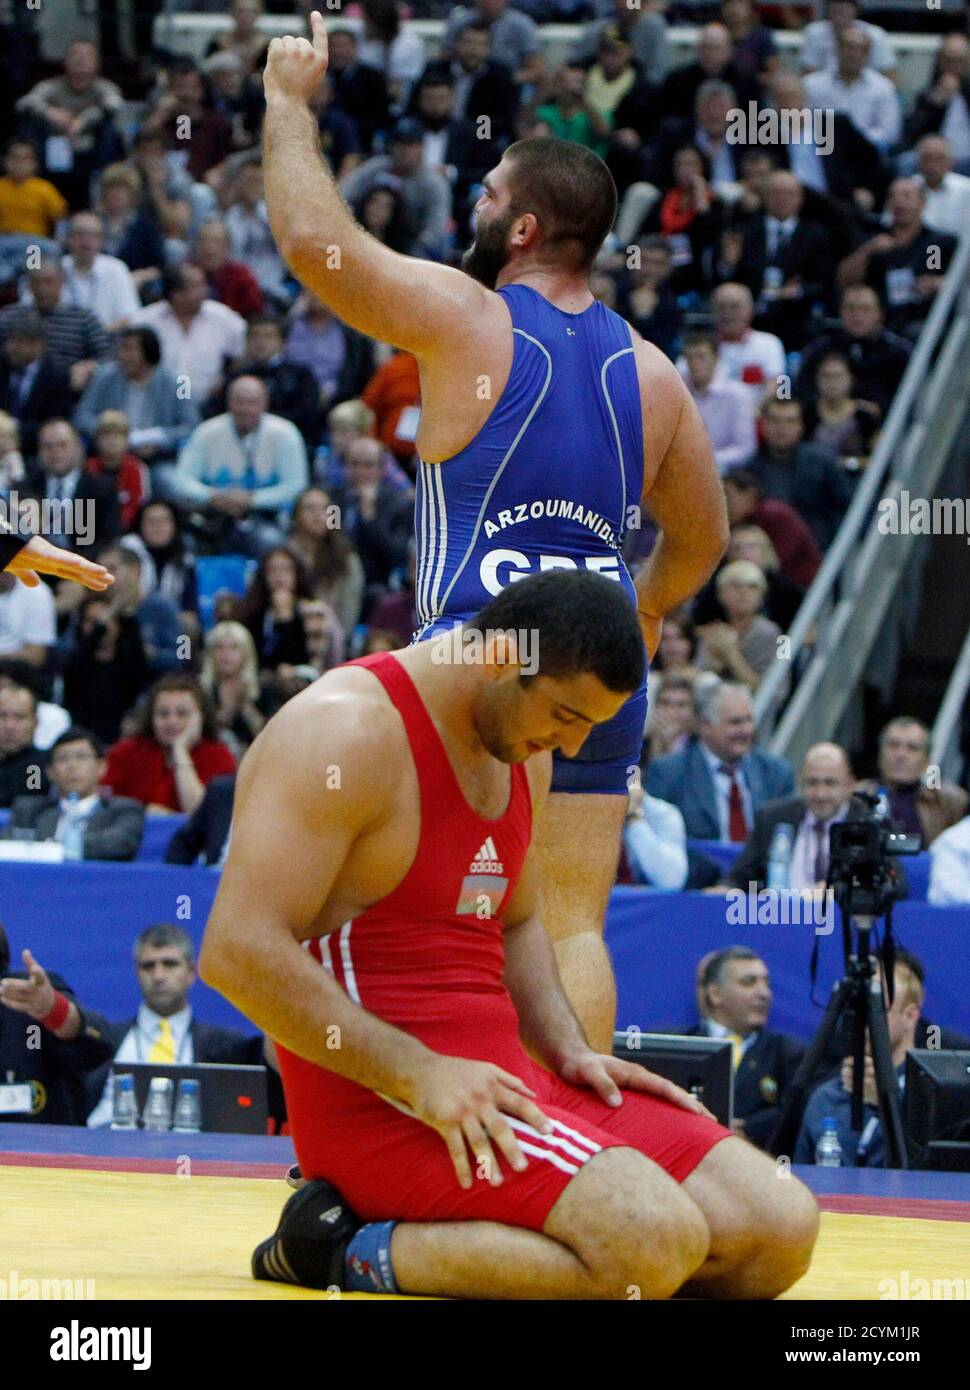 Ioannis Arzoumanidis of Greece celebrates his victory over Ali Isayev of  Azerbaijan (red) during their 120 kg men's free style bronze medal match at  the World Wrestling Championships in Moscow September 12,